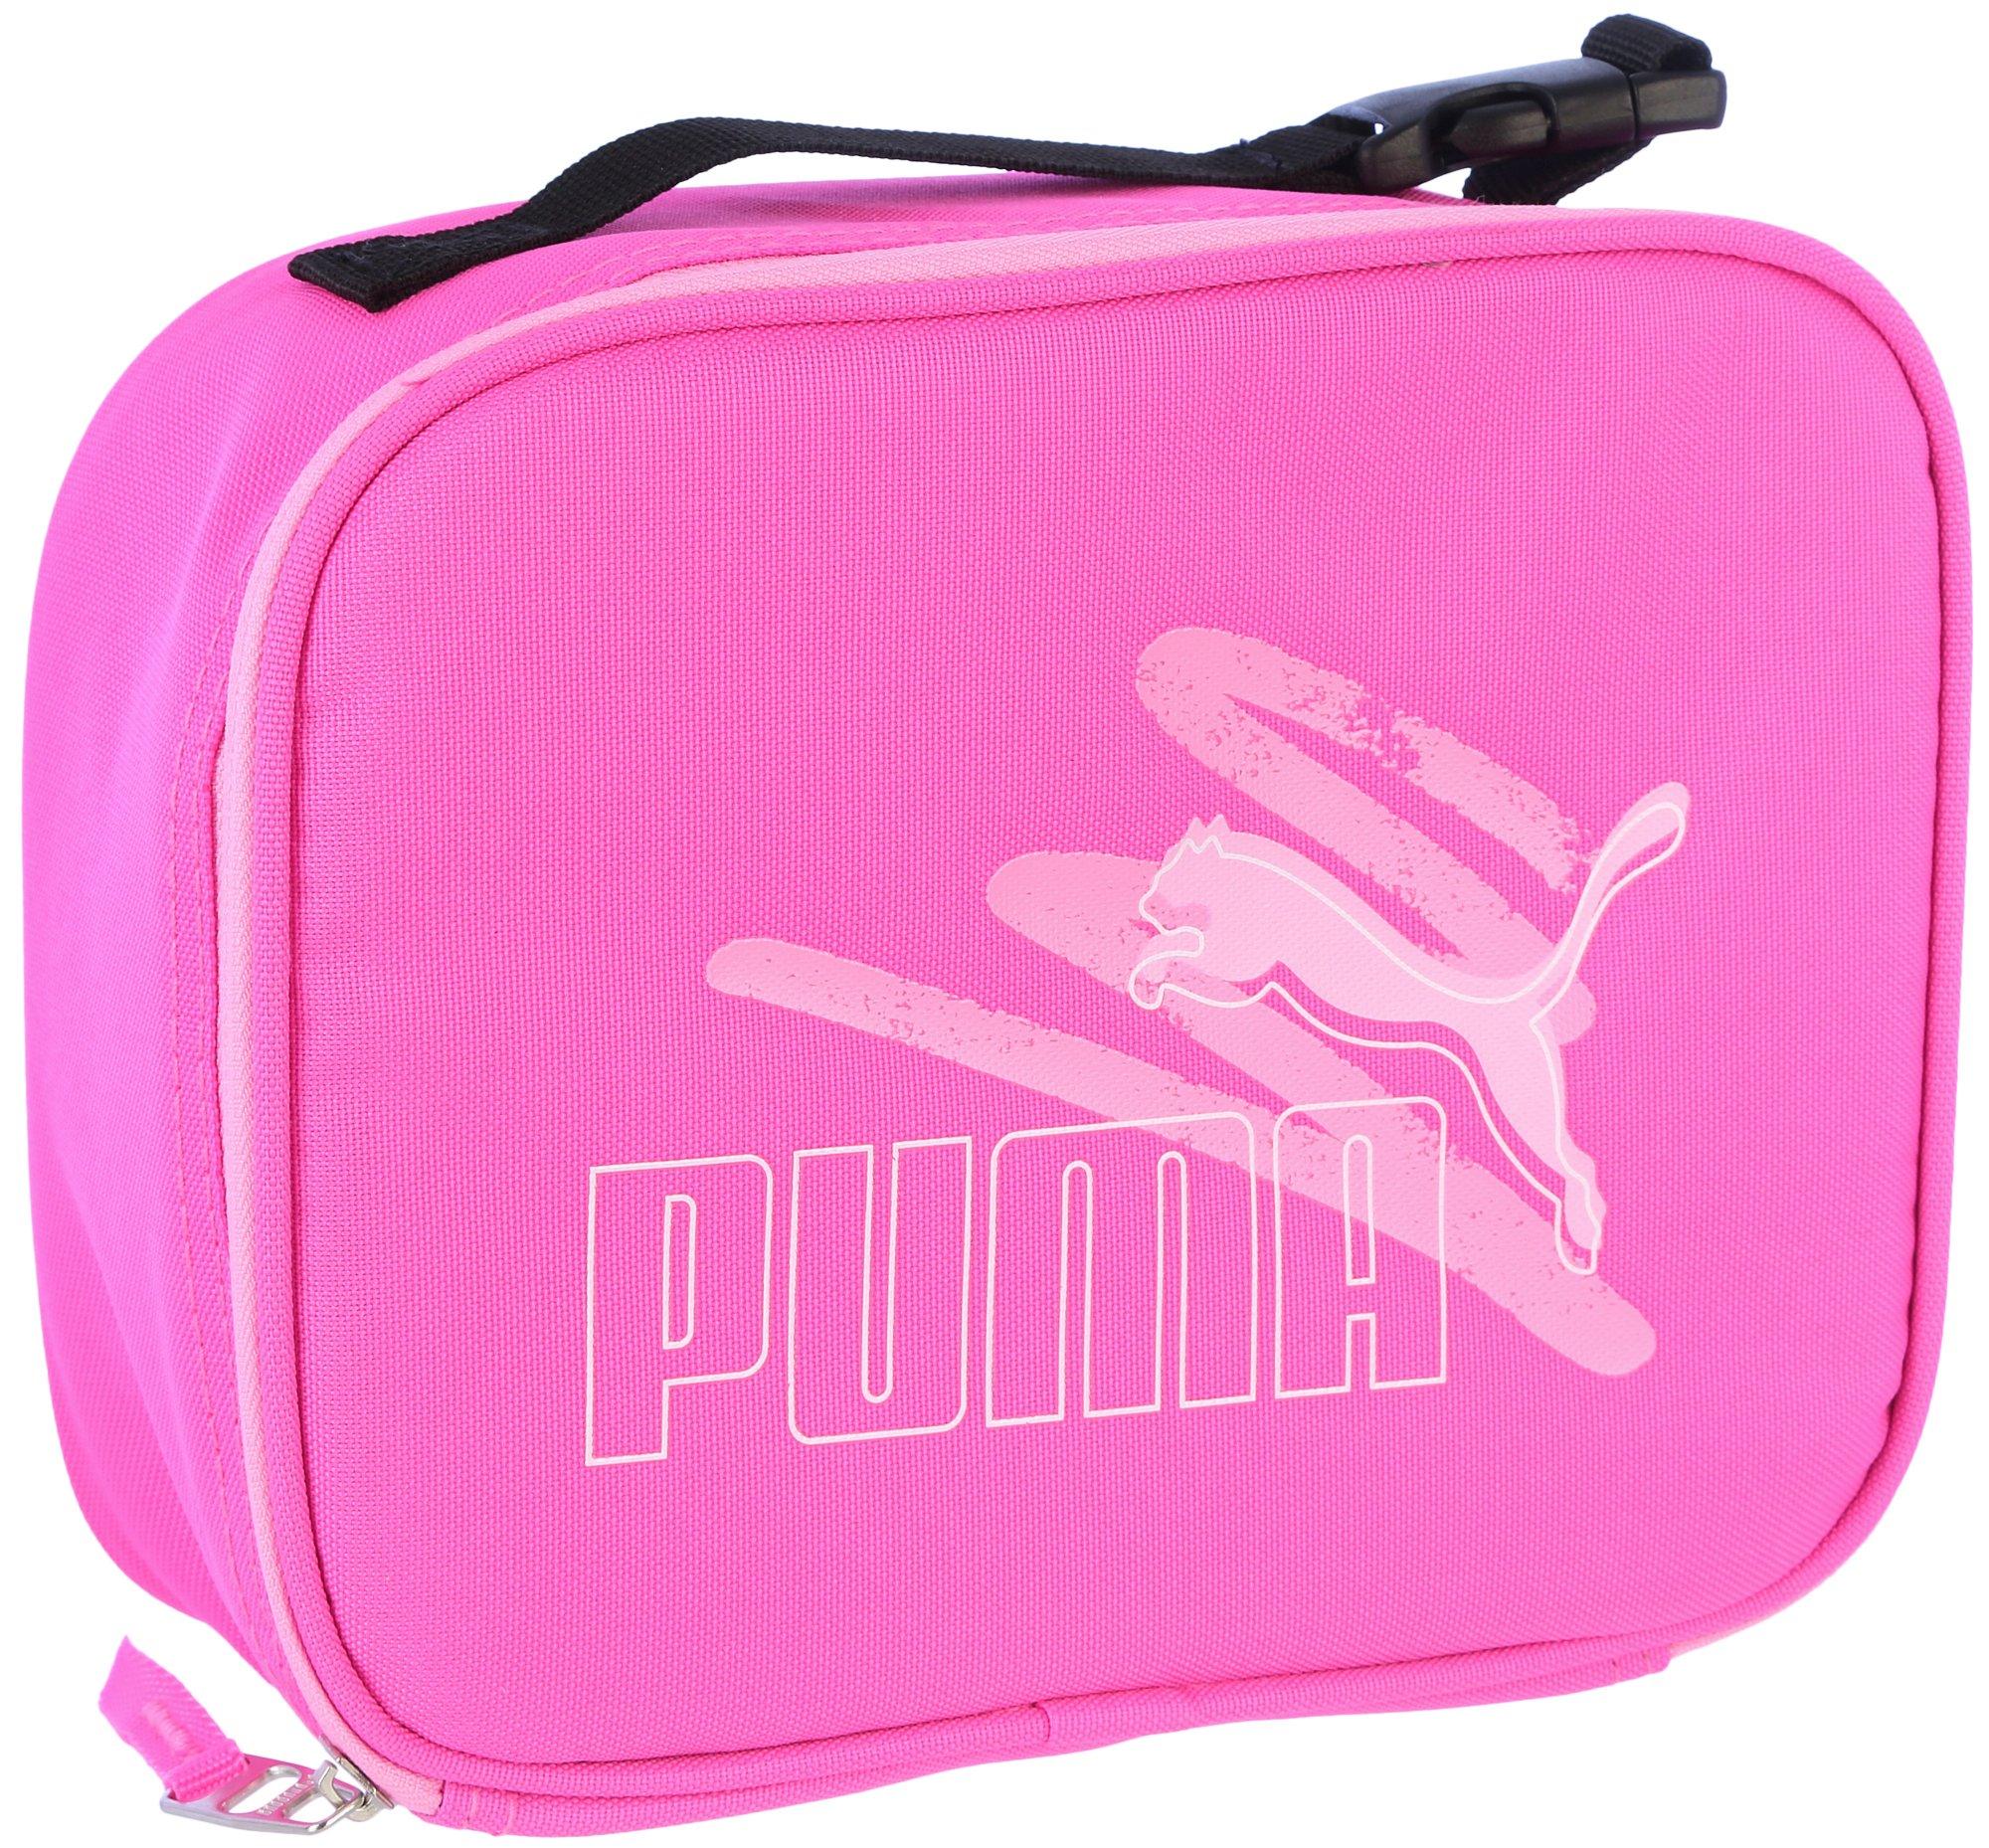 Solid Pro MVP Insulated Lunchbox